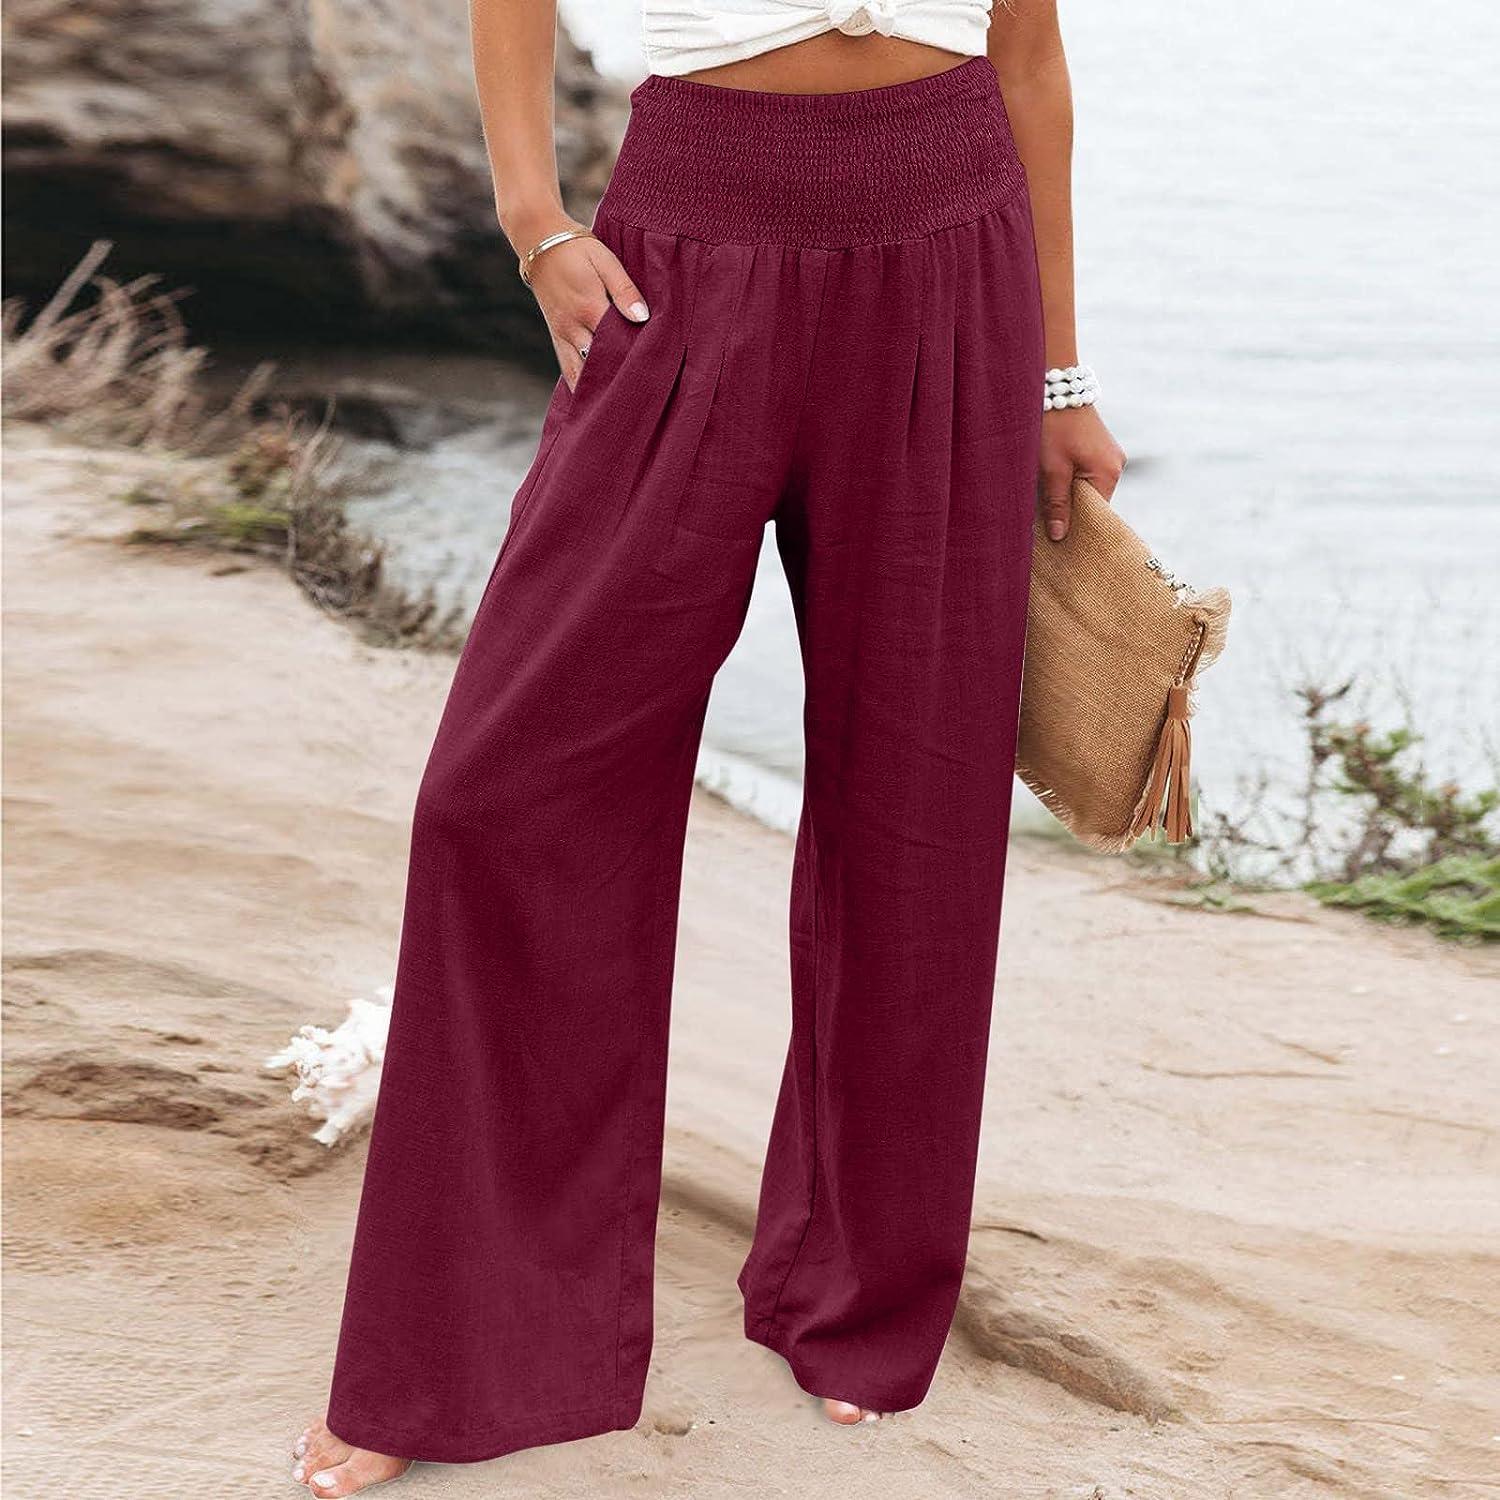 Flowy Beach Pants for Women high Waisted Summer Palazzo Pants Lounge  Trousers Cotton Linen Wide Leg Pants with Pockets Small A3-wine